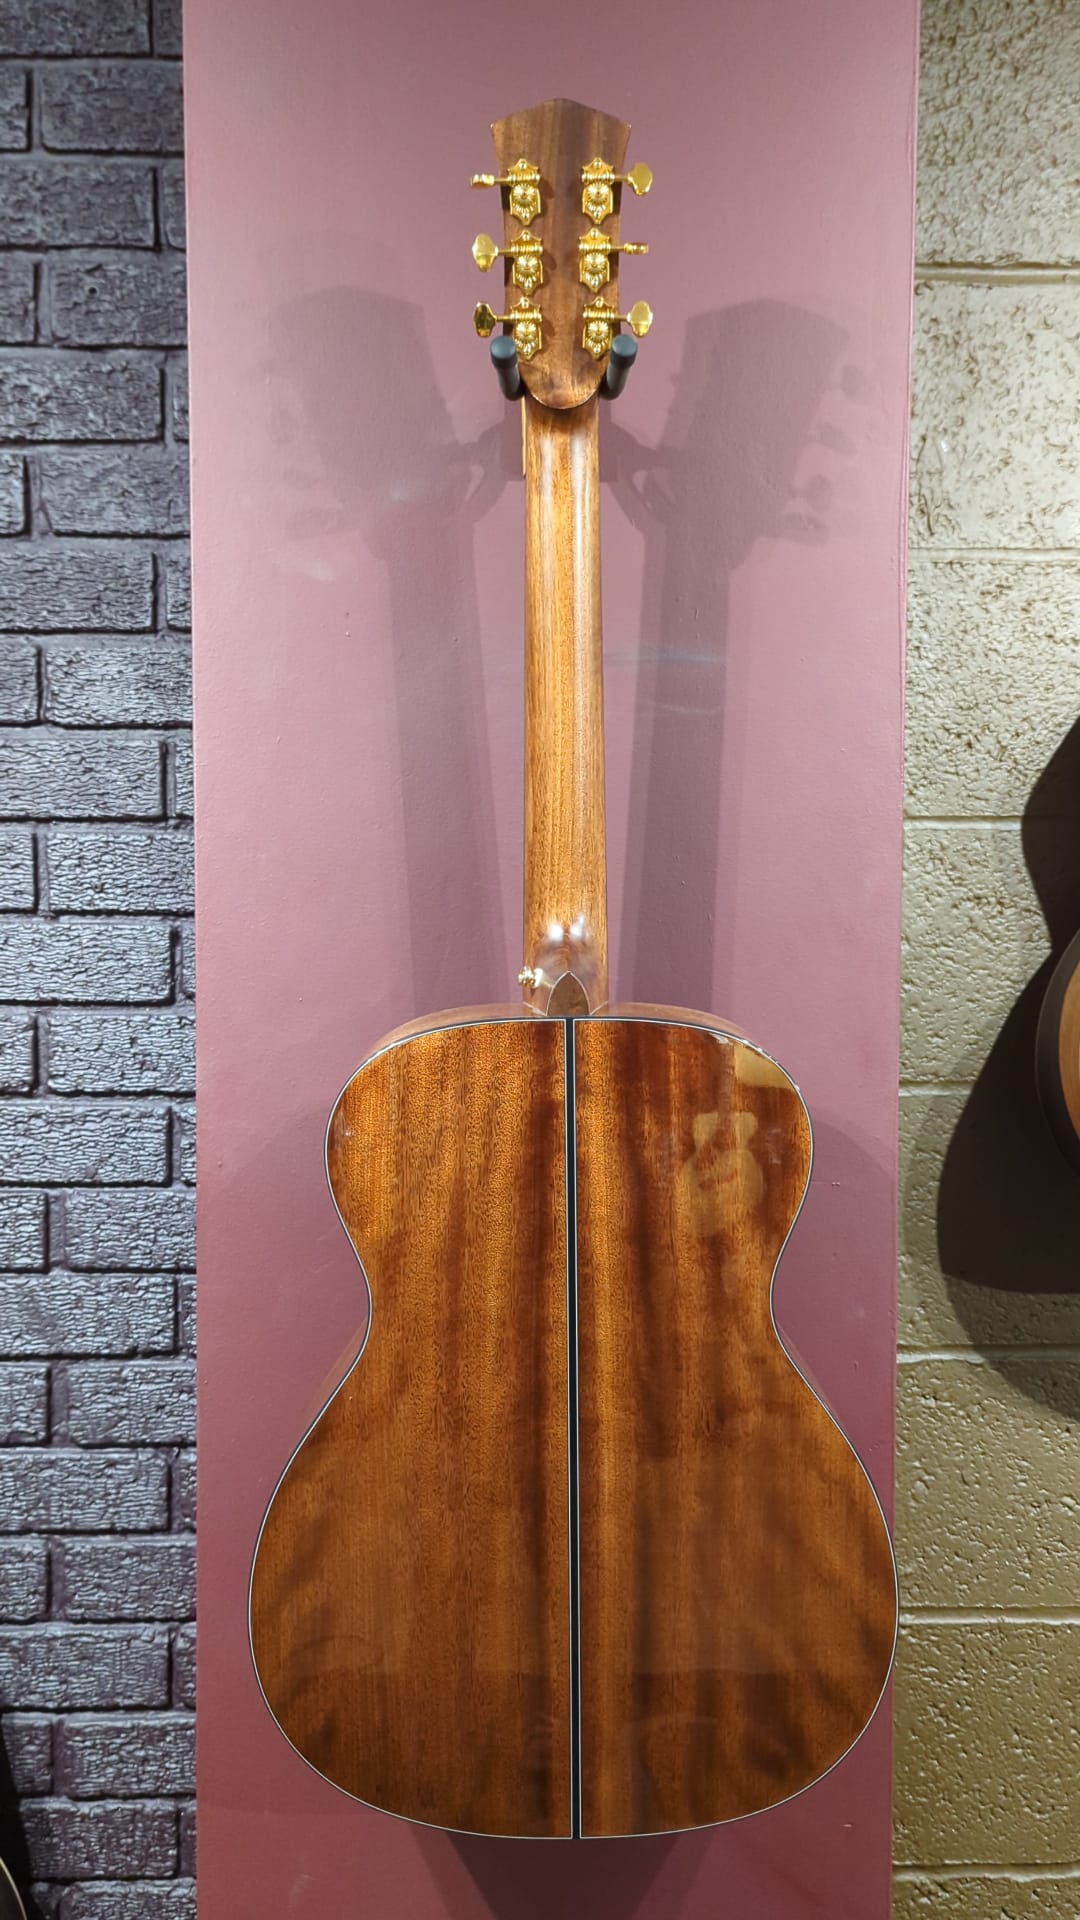 Cort Gold O6 Natural (used), Acoustic guitar for sale at Richards Guitars.